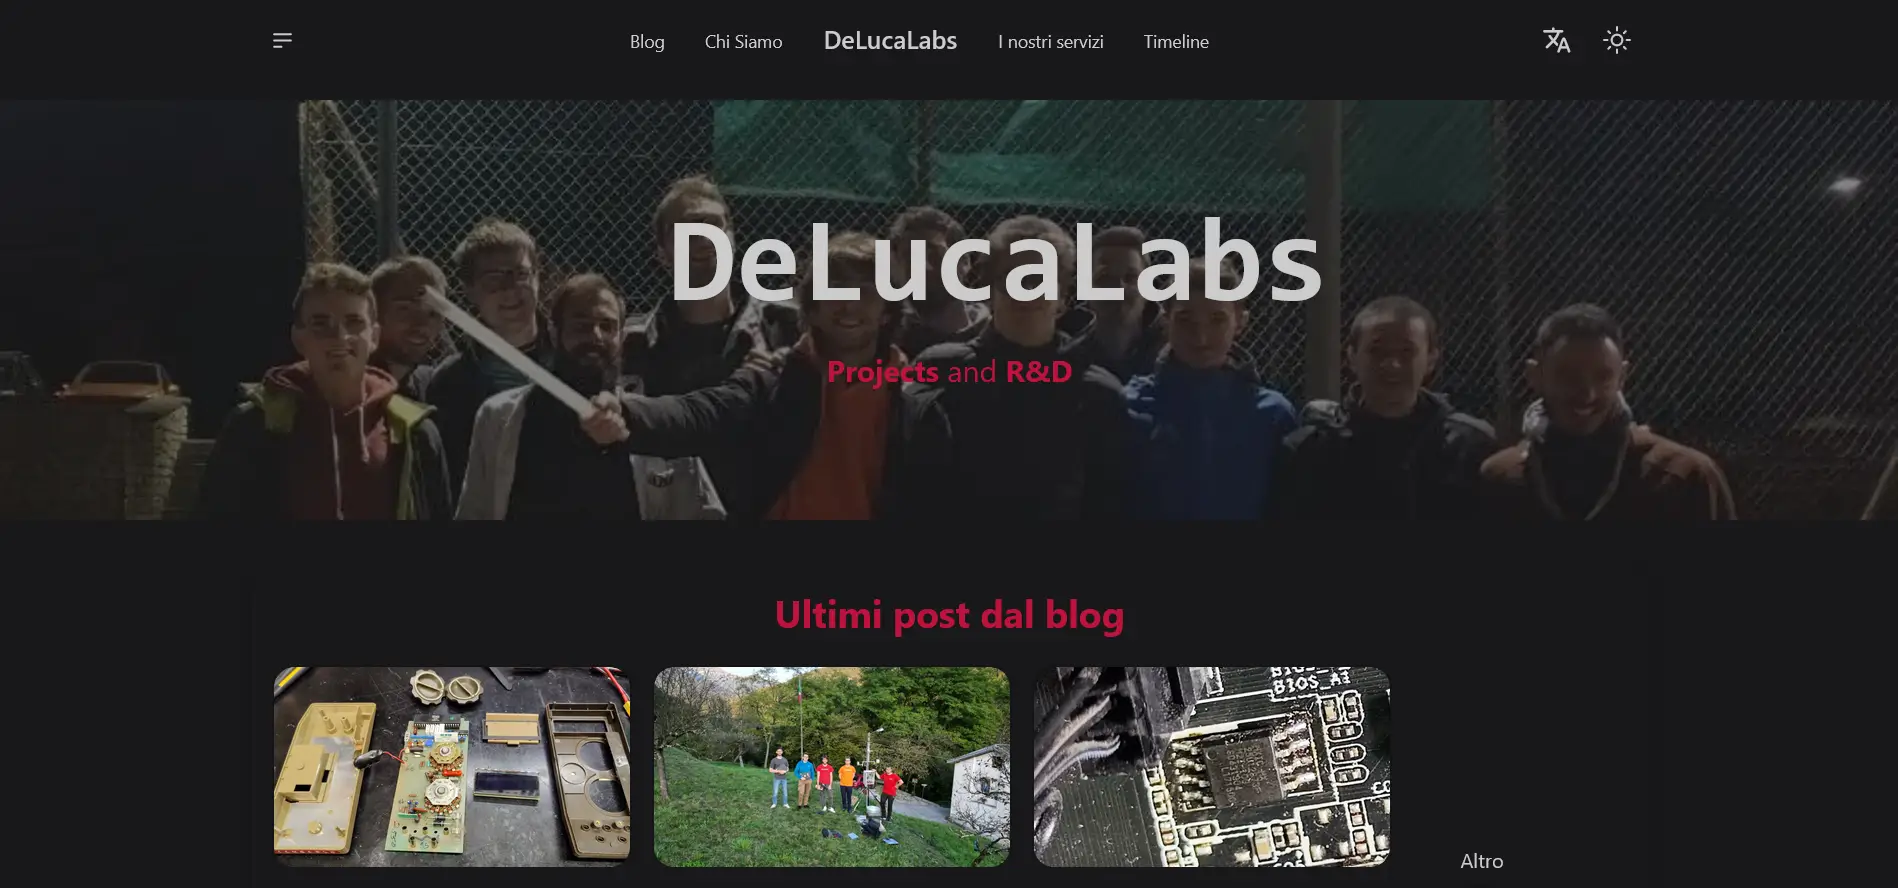 Delucalabs